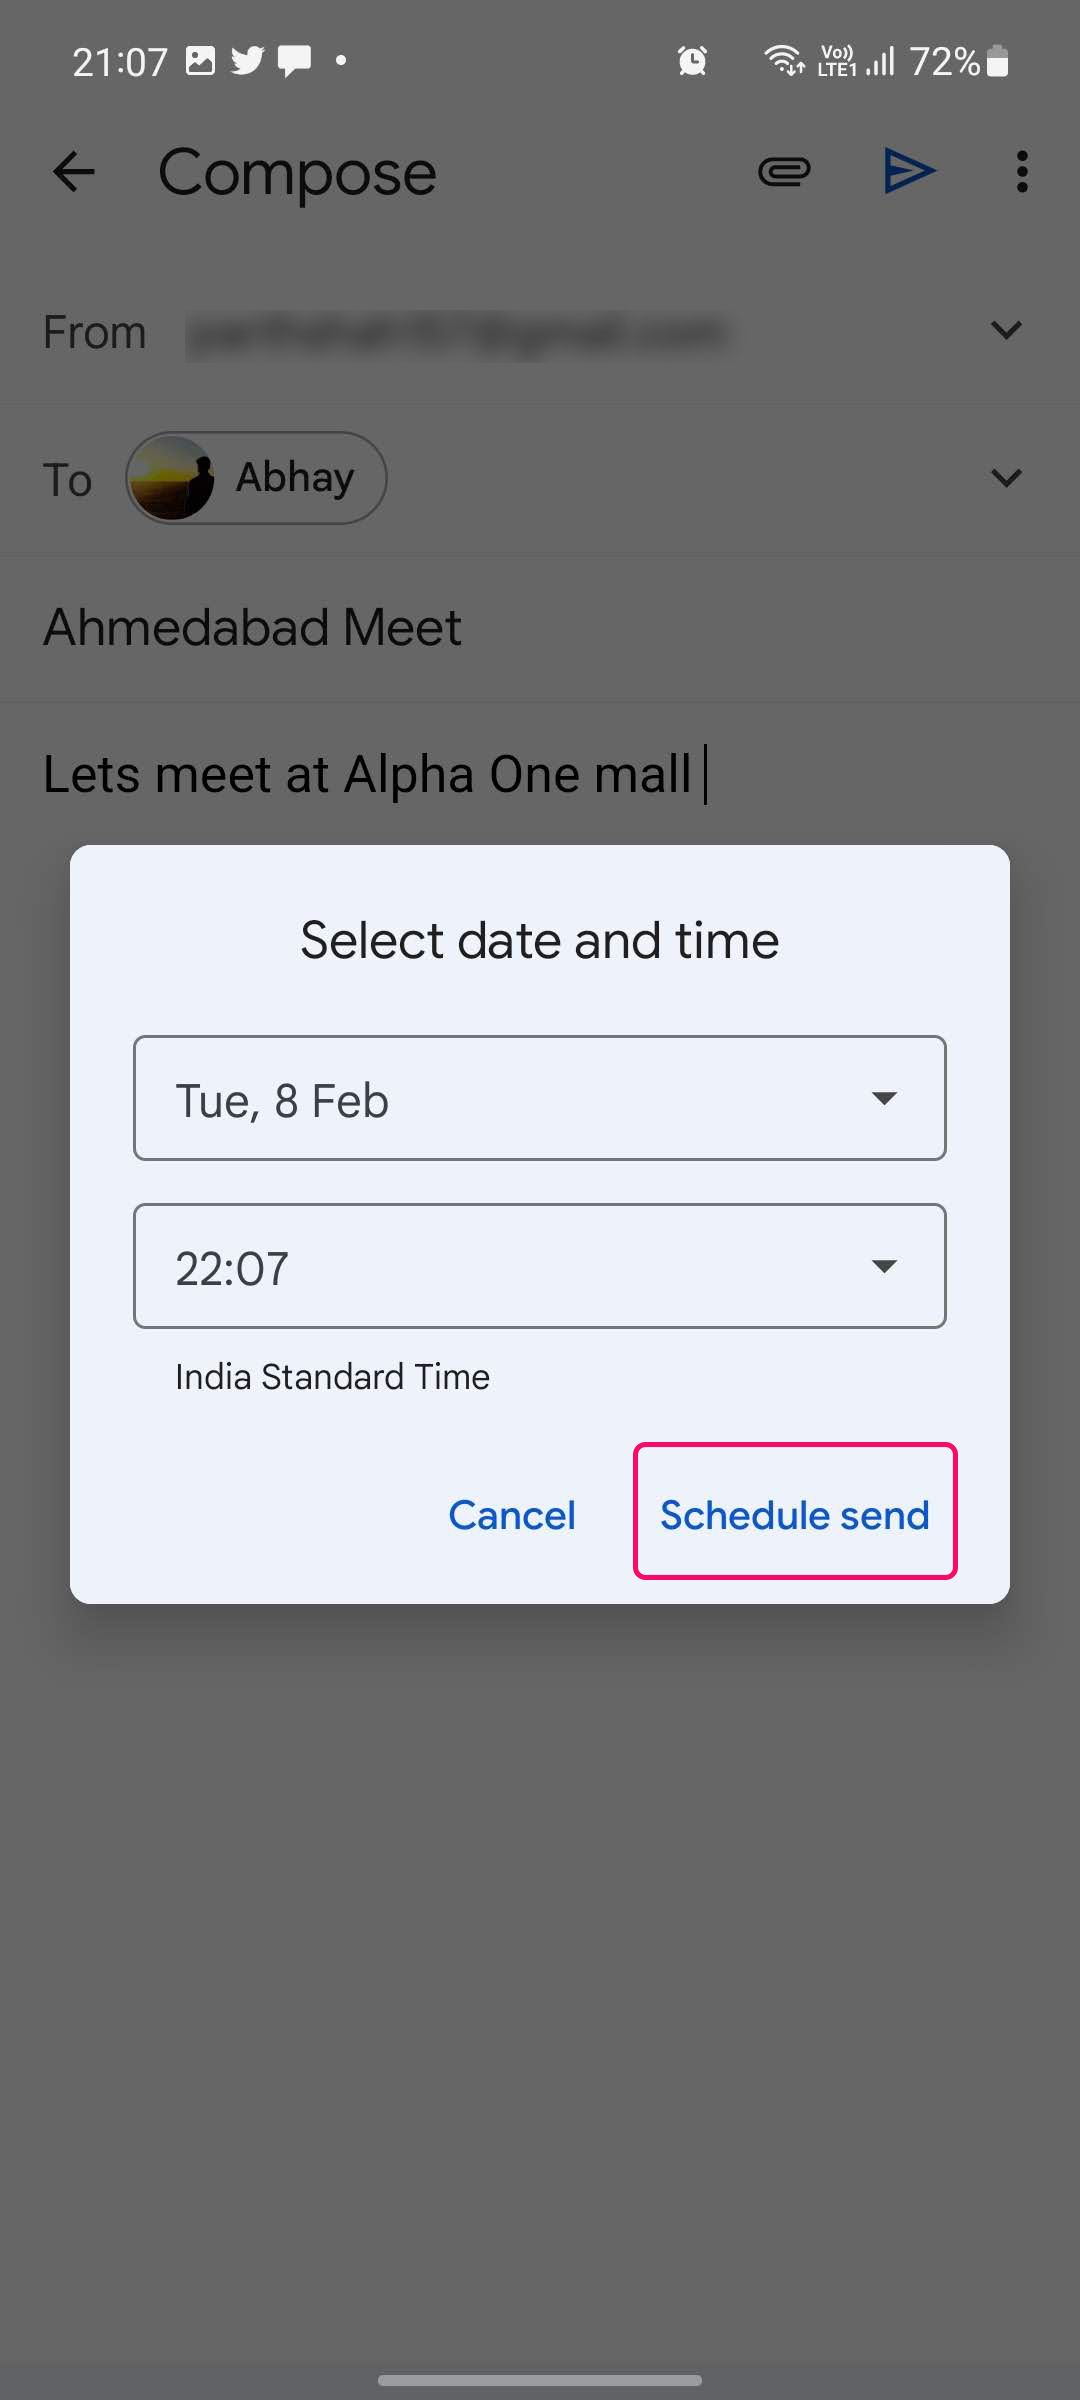 After selecting a date and time to send the message, tap 'Schedule send' to send the message later.